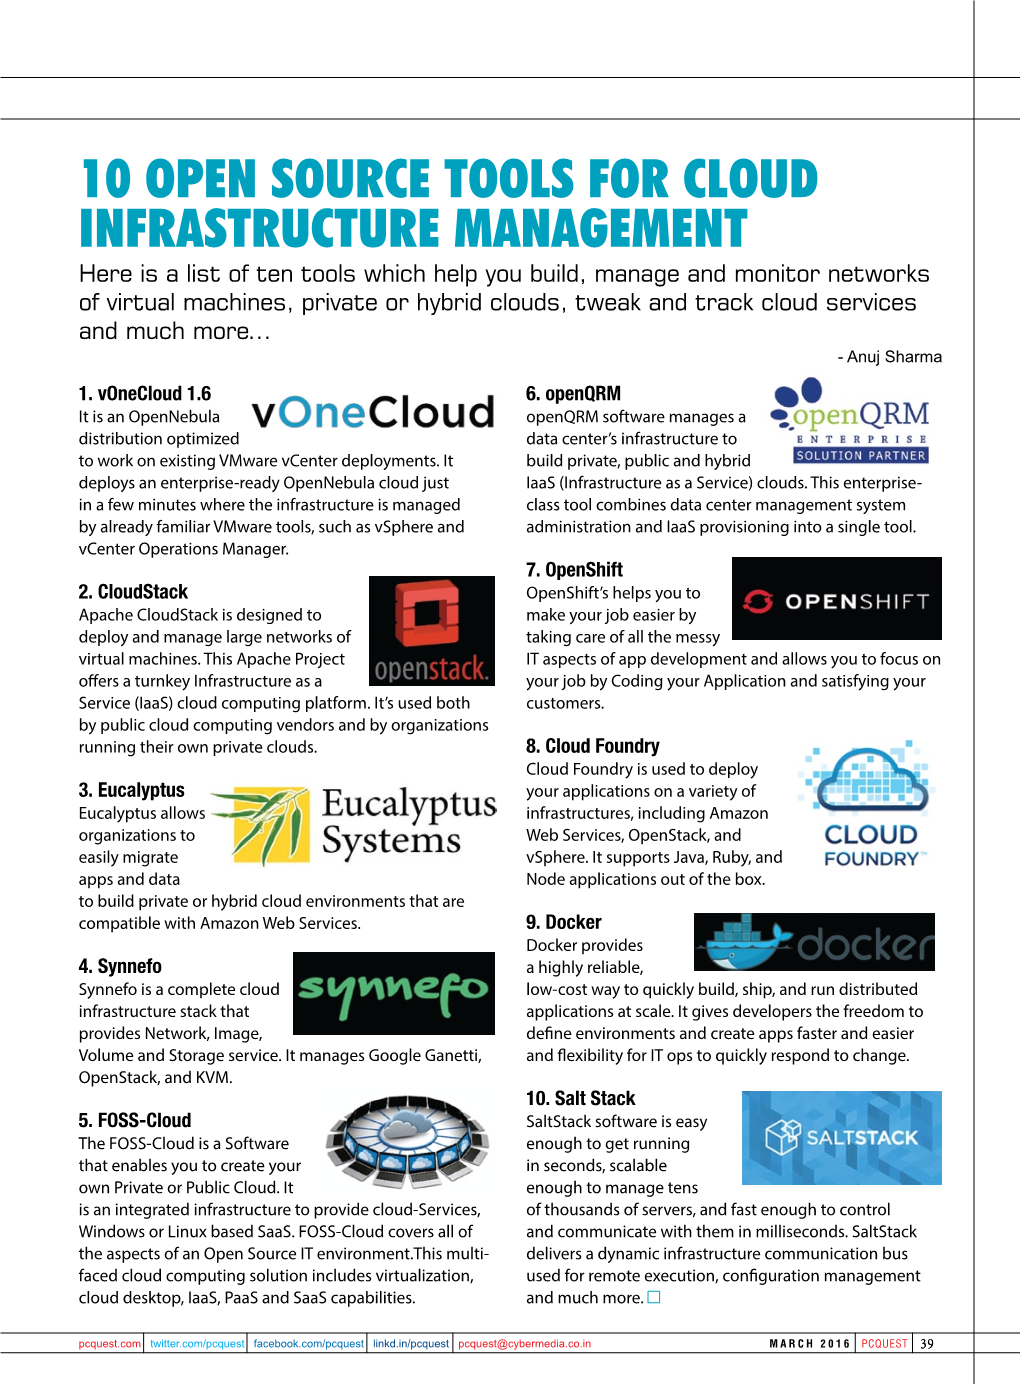 10 Open Source Tools for Cloud Infrastructure Management